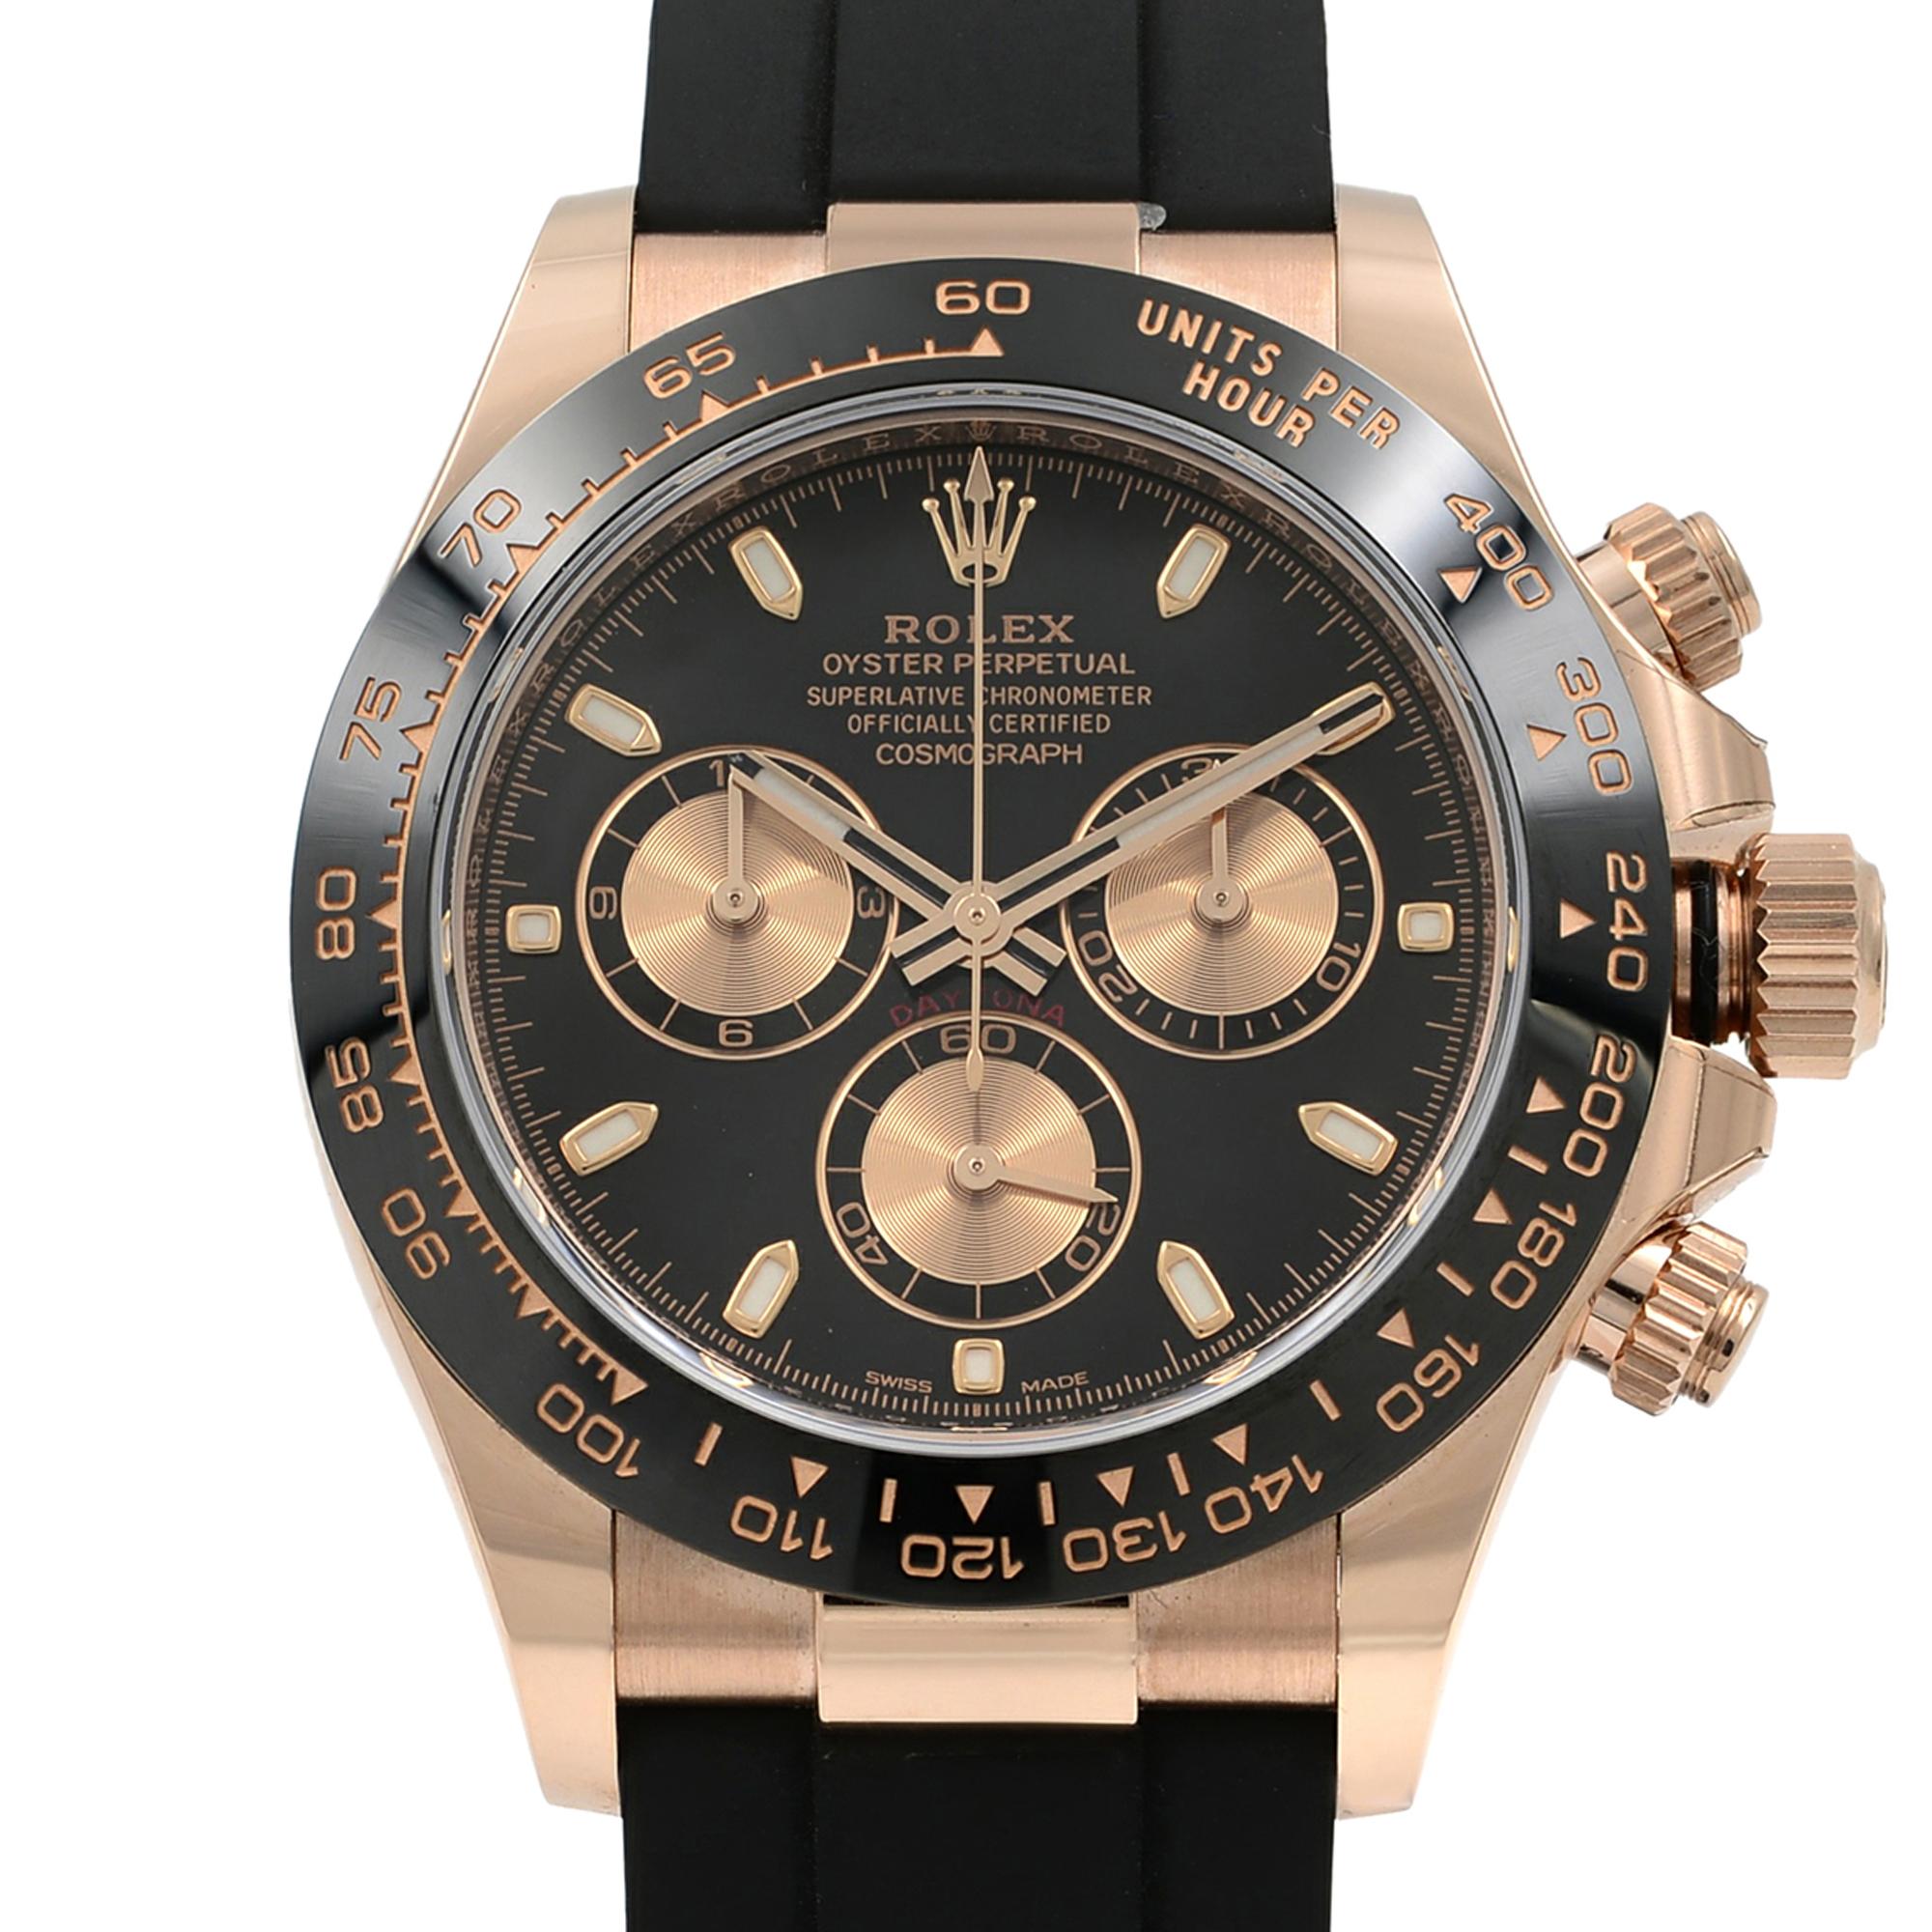 Brand	Rolex
Series	Daytona
Model	Cosmograph
Model Number	116515LN bkpof
Serial	Scrambled
Production Year	2019
Movement	Automatic Self Wind
Gender	Mens
Case Material	Rose Gold
Case Shape	Round
Case Diameter w/ crown	43mm
Case Diameter	40mm
Bezel